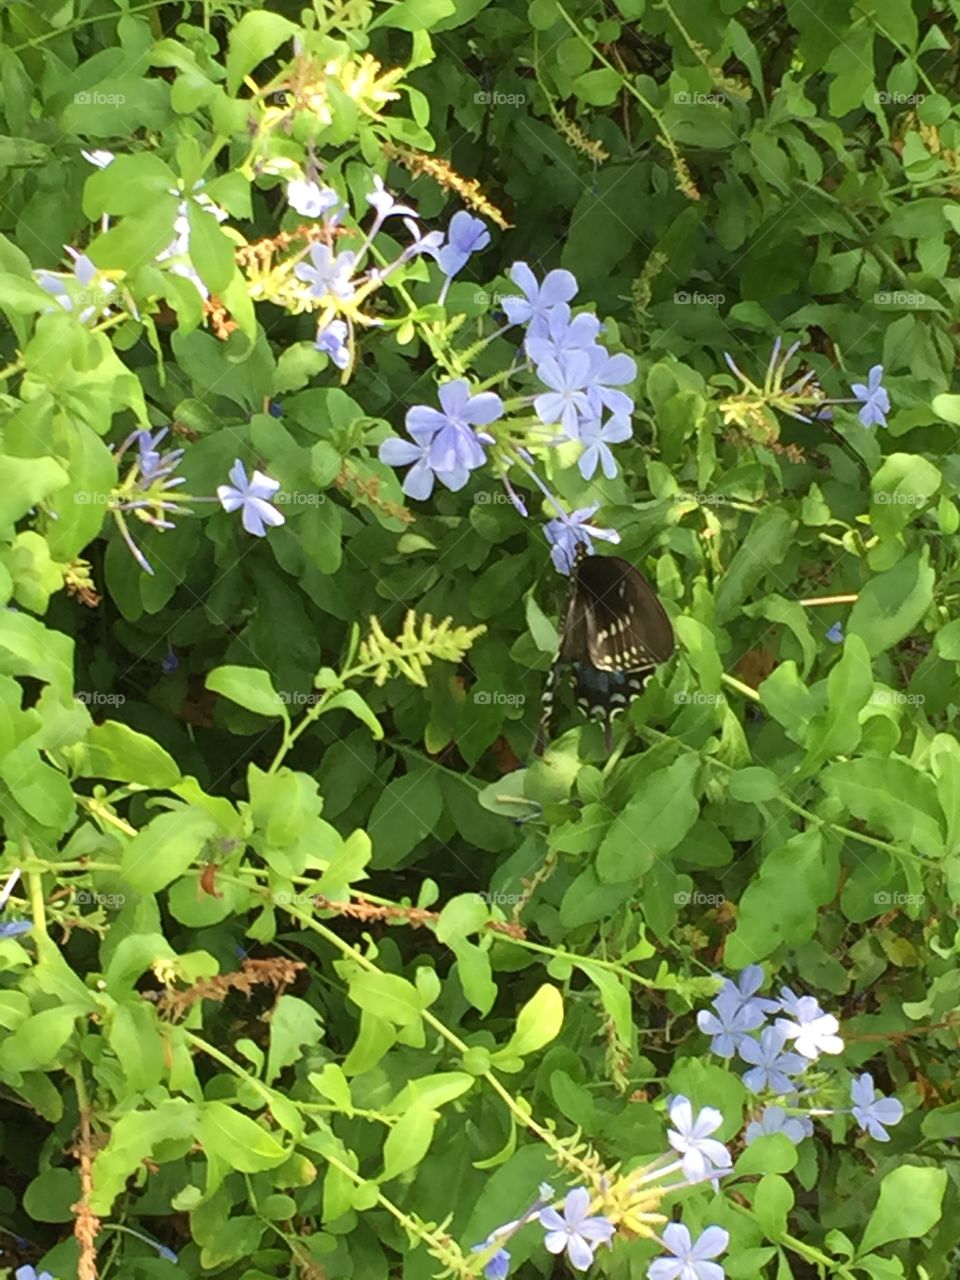 Butterfly in my front yard enjoying Spring flowers.